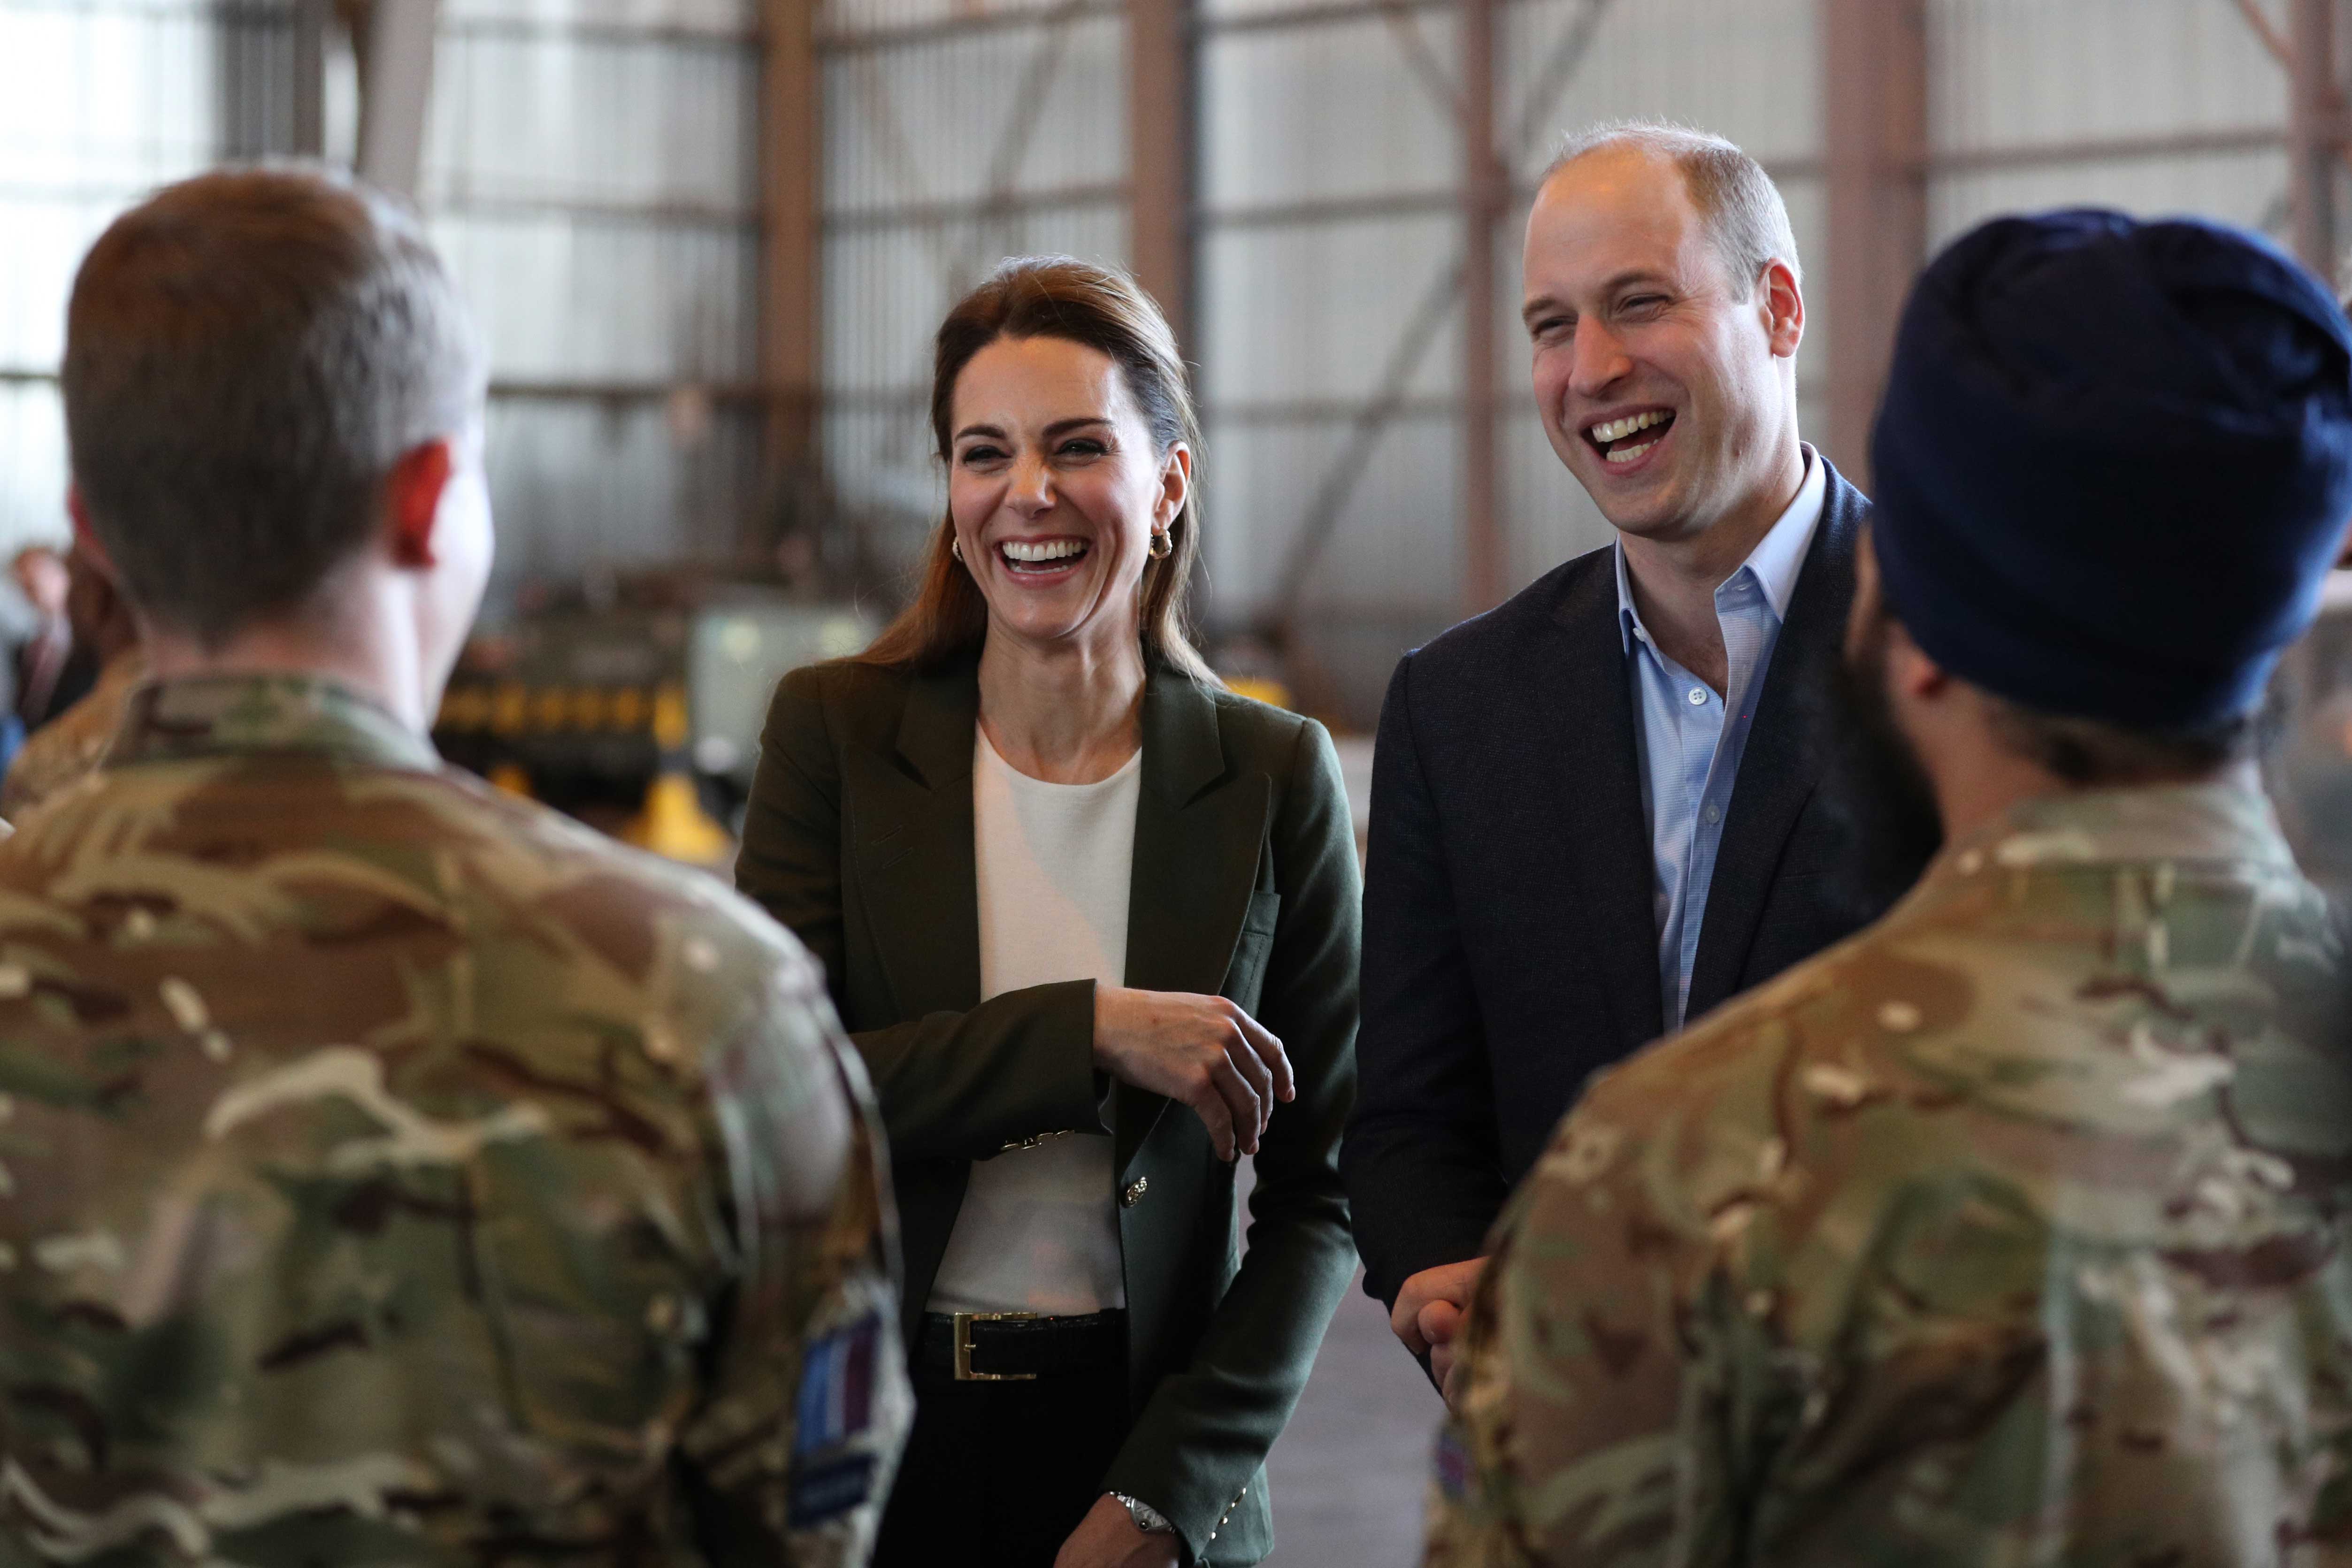 The Duke and Duchess of Cambridge in Cyprus Delivering a Message of Support to Military Stationed there